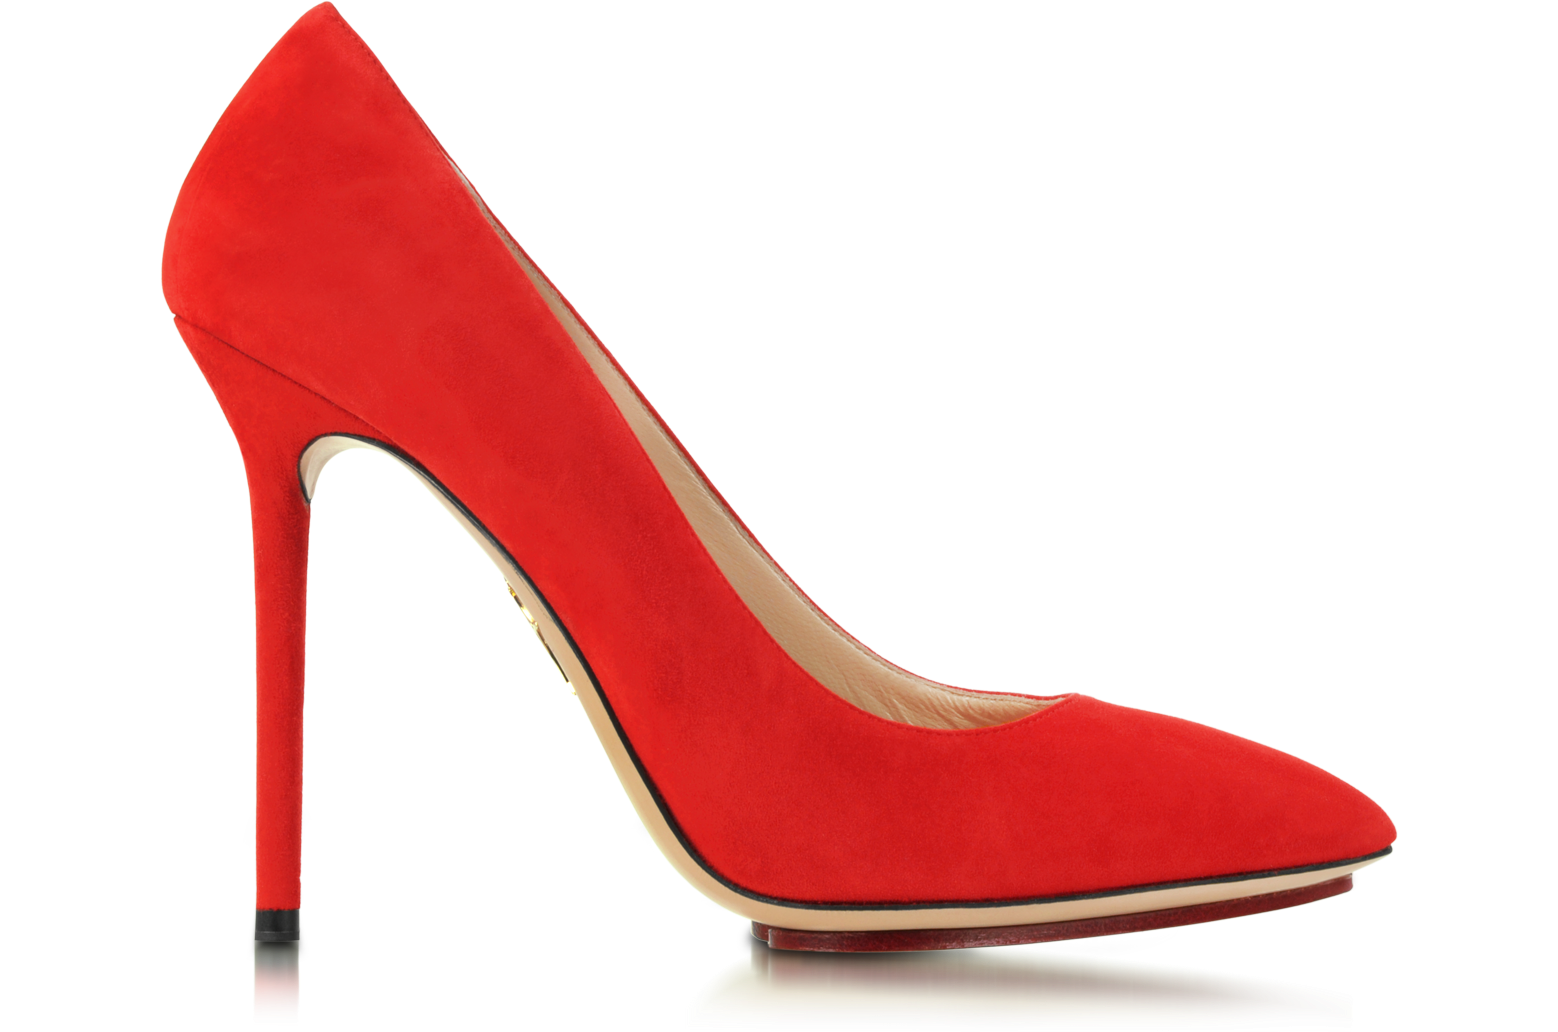 Charlotte Olympia Monroe Red Suede Pump 40 IT/EU at FORZIERI